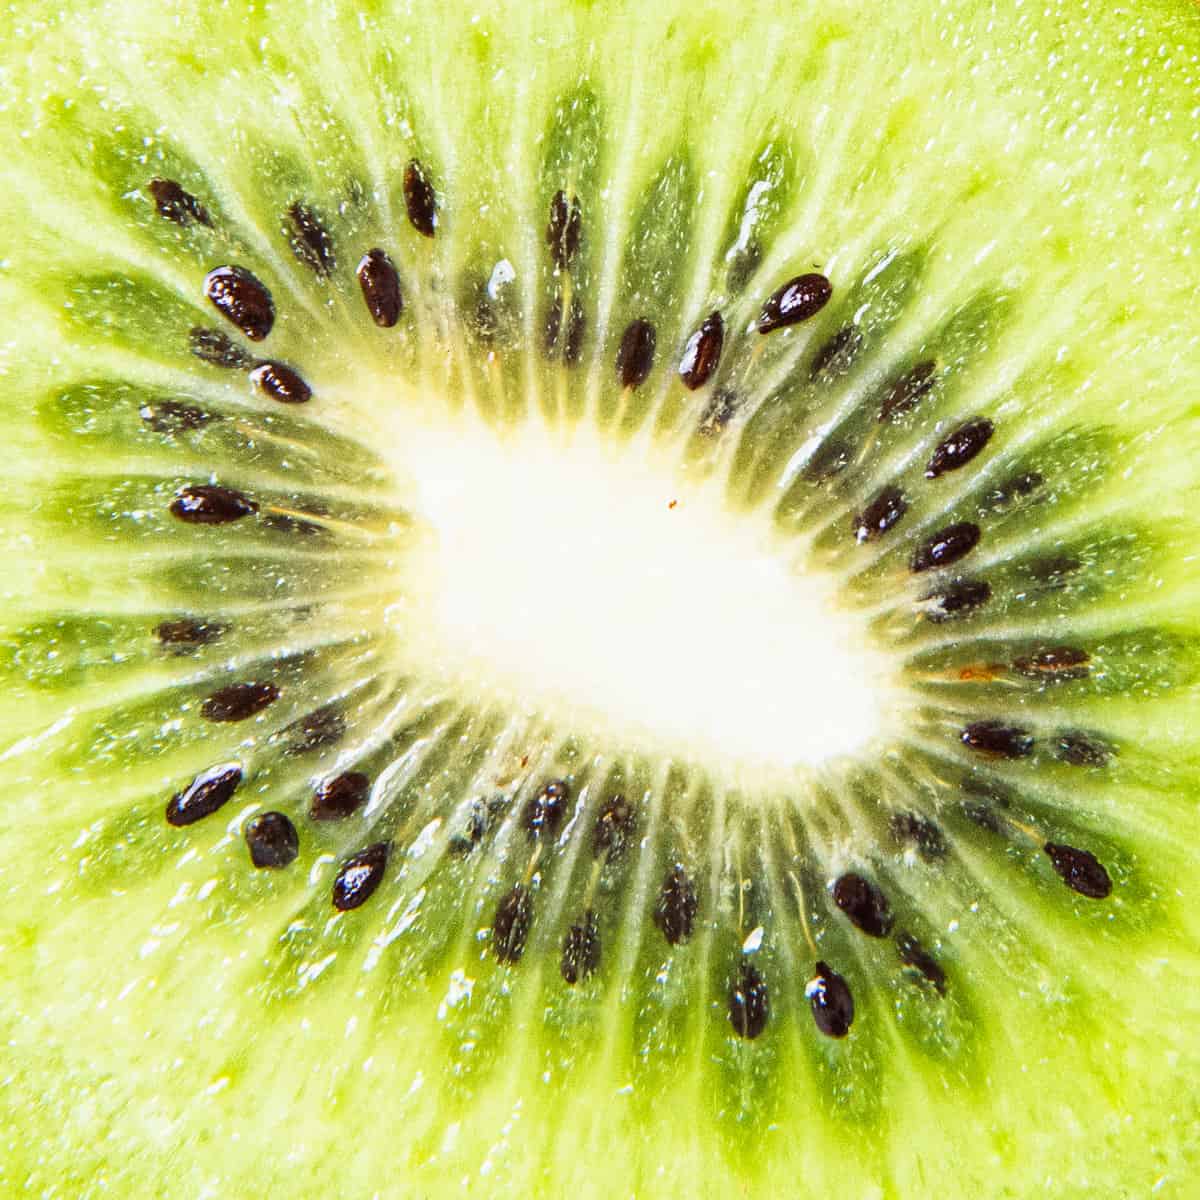 Close up of a kiwi showing the seeds.